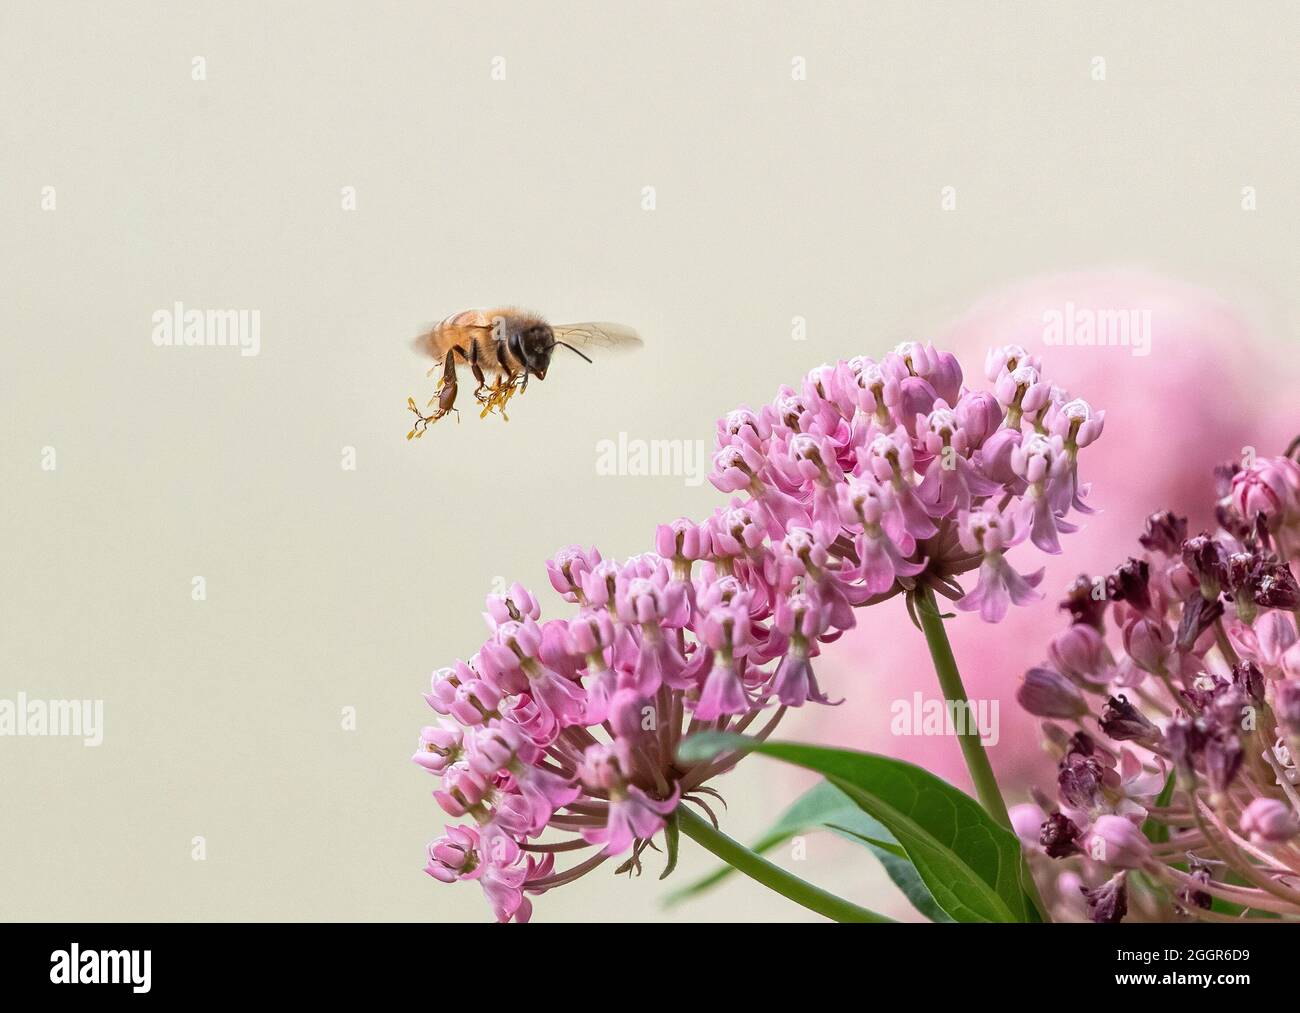 Closeup of a honeybee in flight with attached pollen granules, or pollinia, dangling in the breeze as it looks to land. Stock Photo